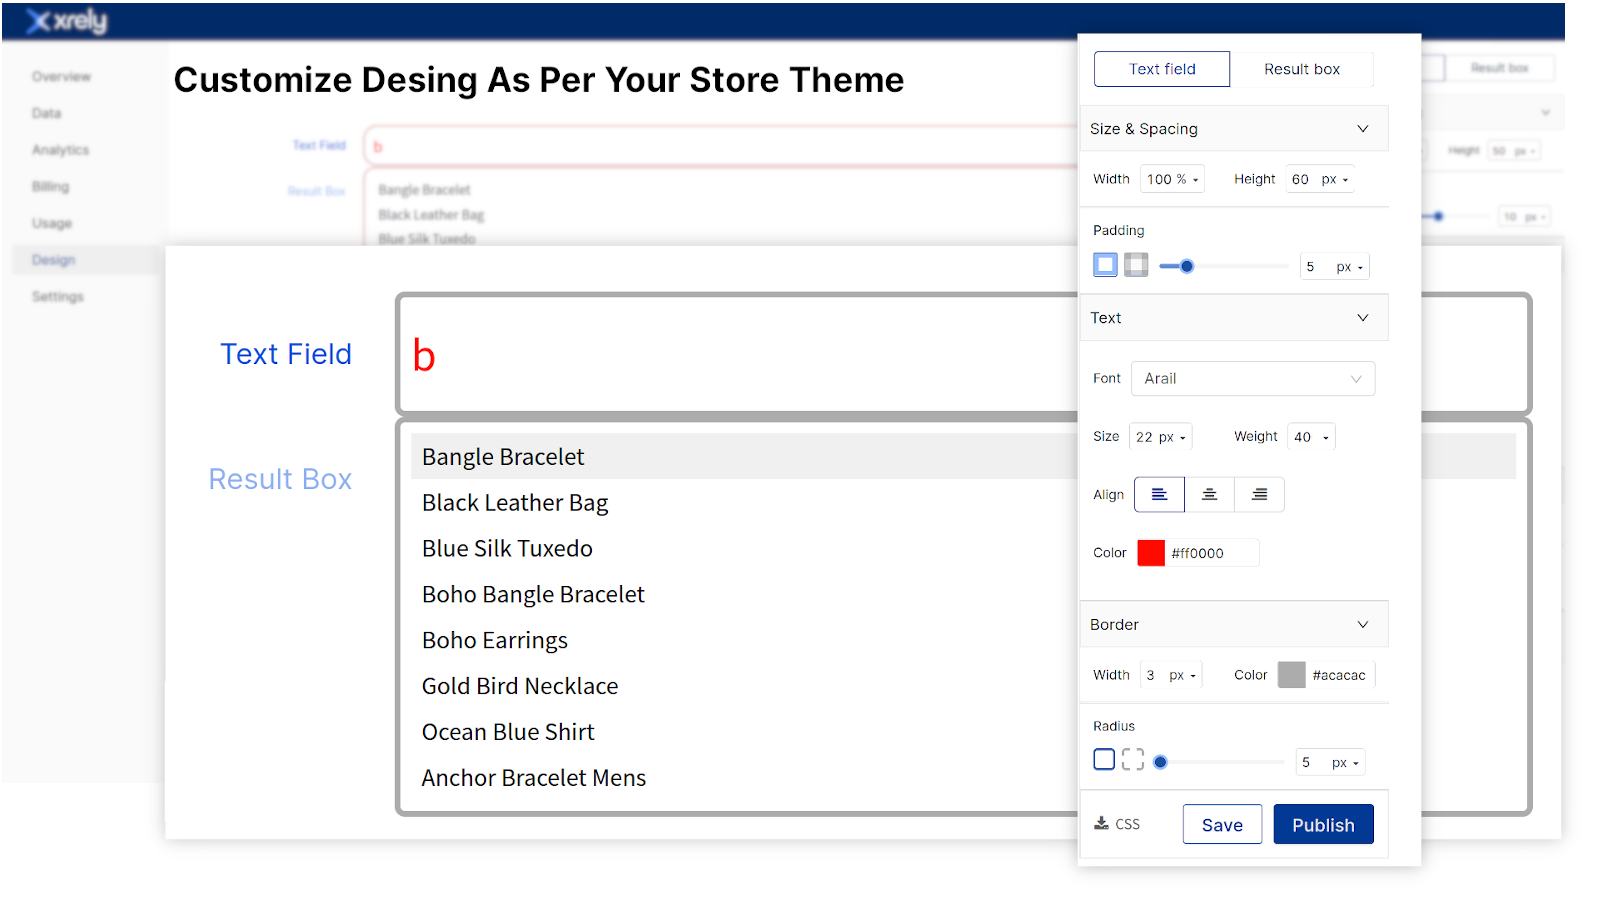 Design autocomplete as per your store theme